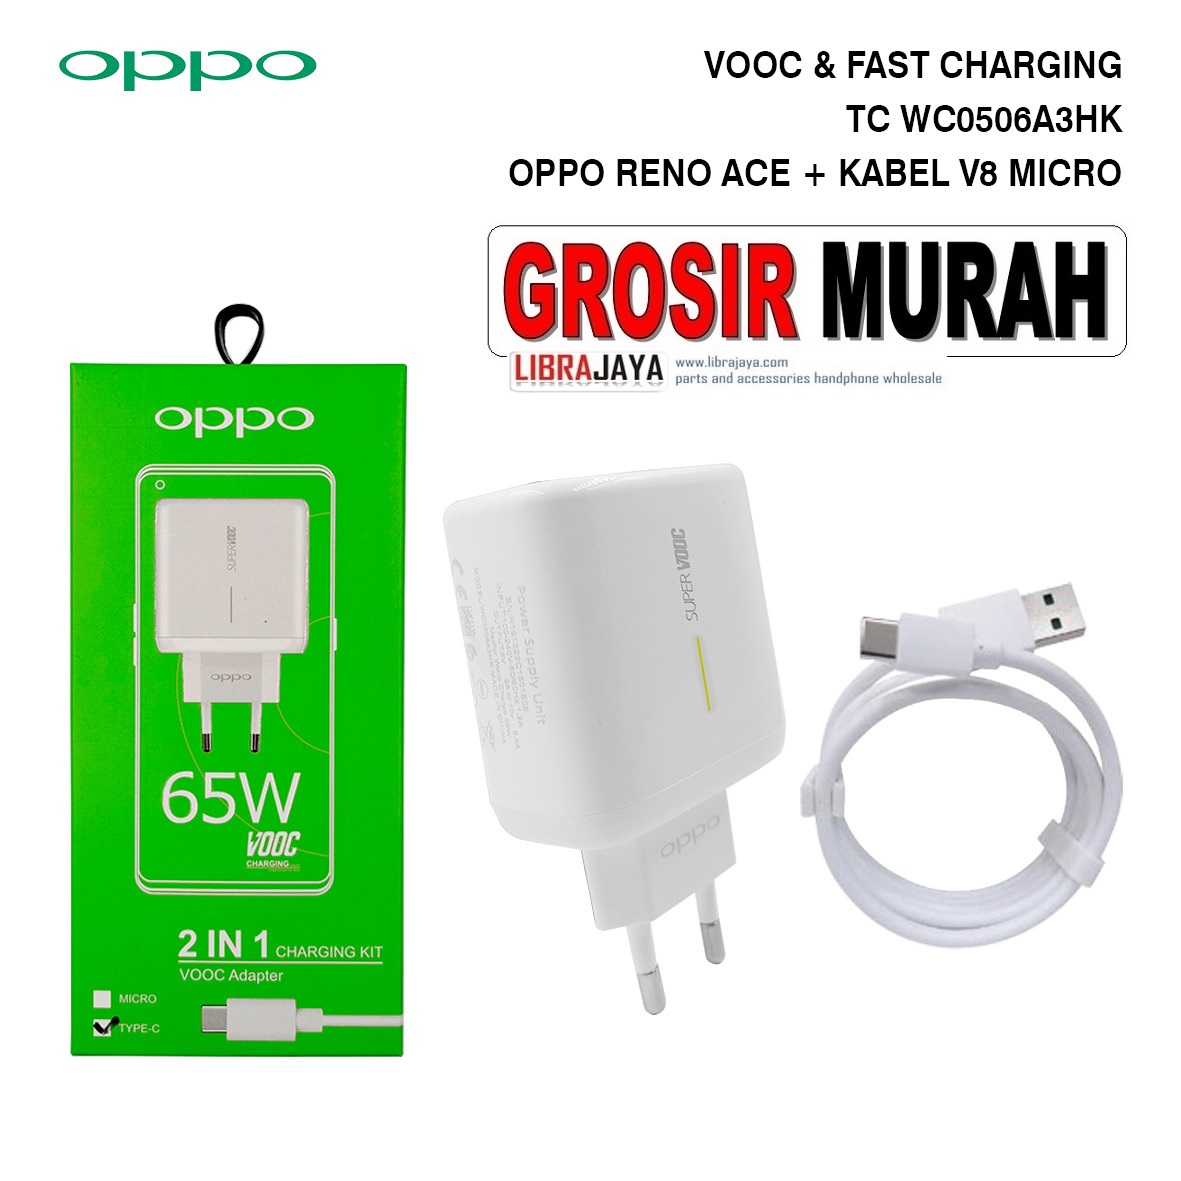 Charger Oppo Micro Wc0506A3Hk Bergaransi